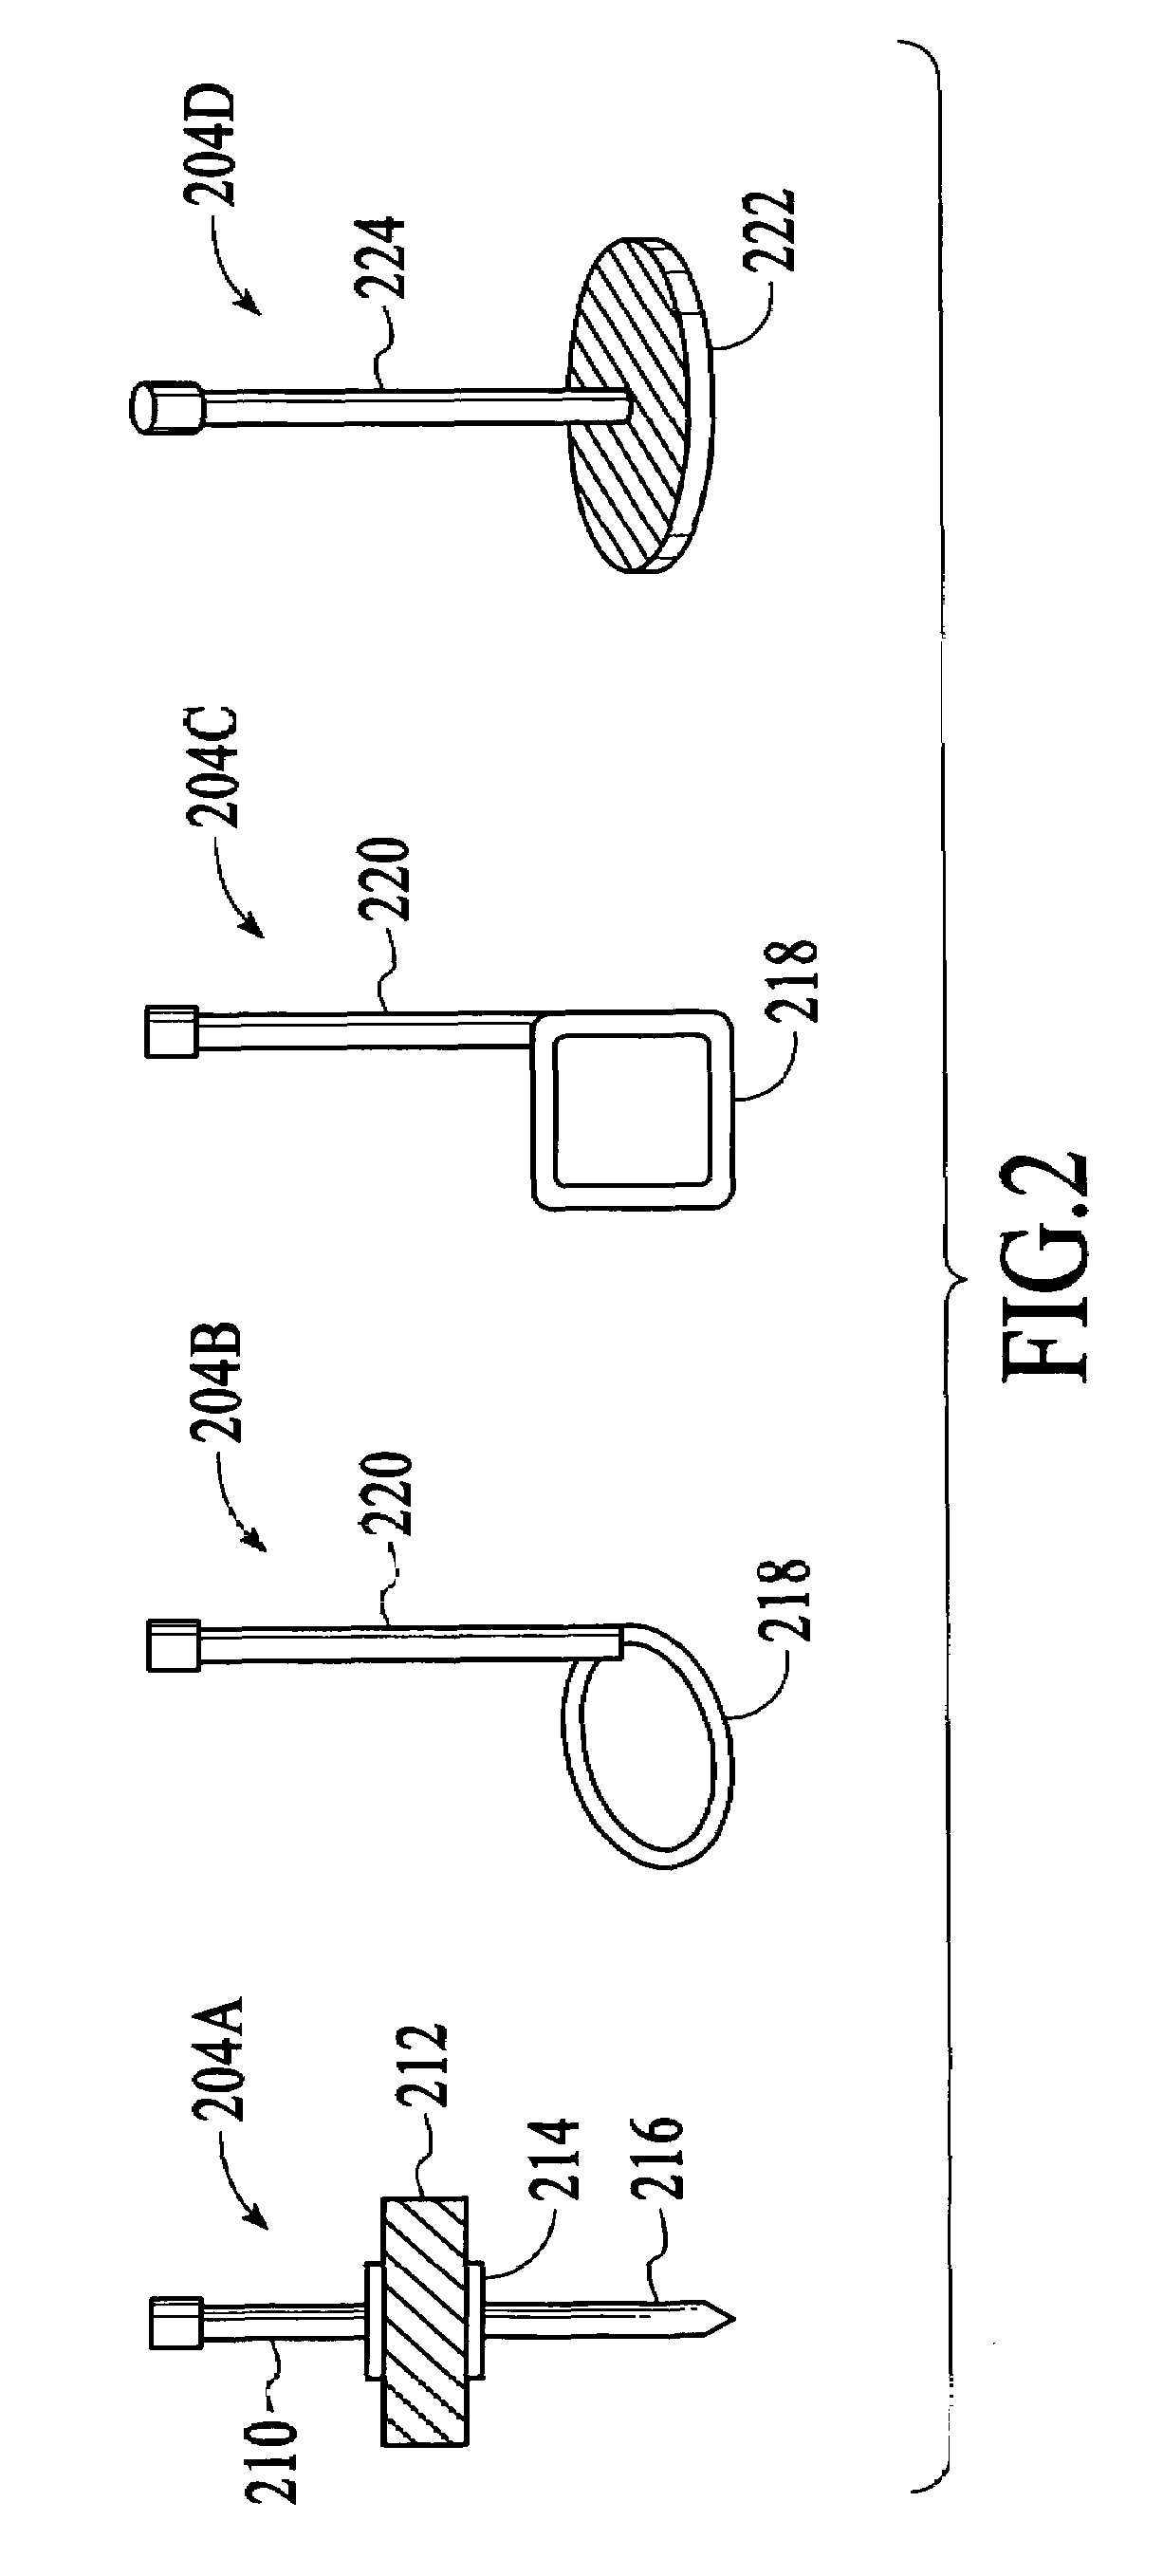 System and method for testing the electromagnetic susceptibility of an electronic display unit